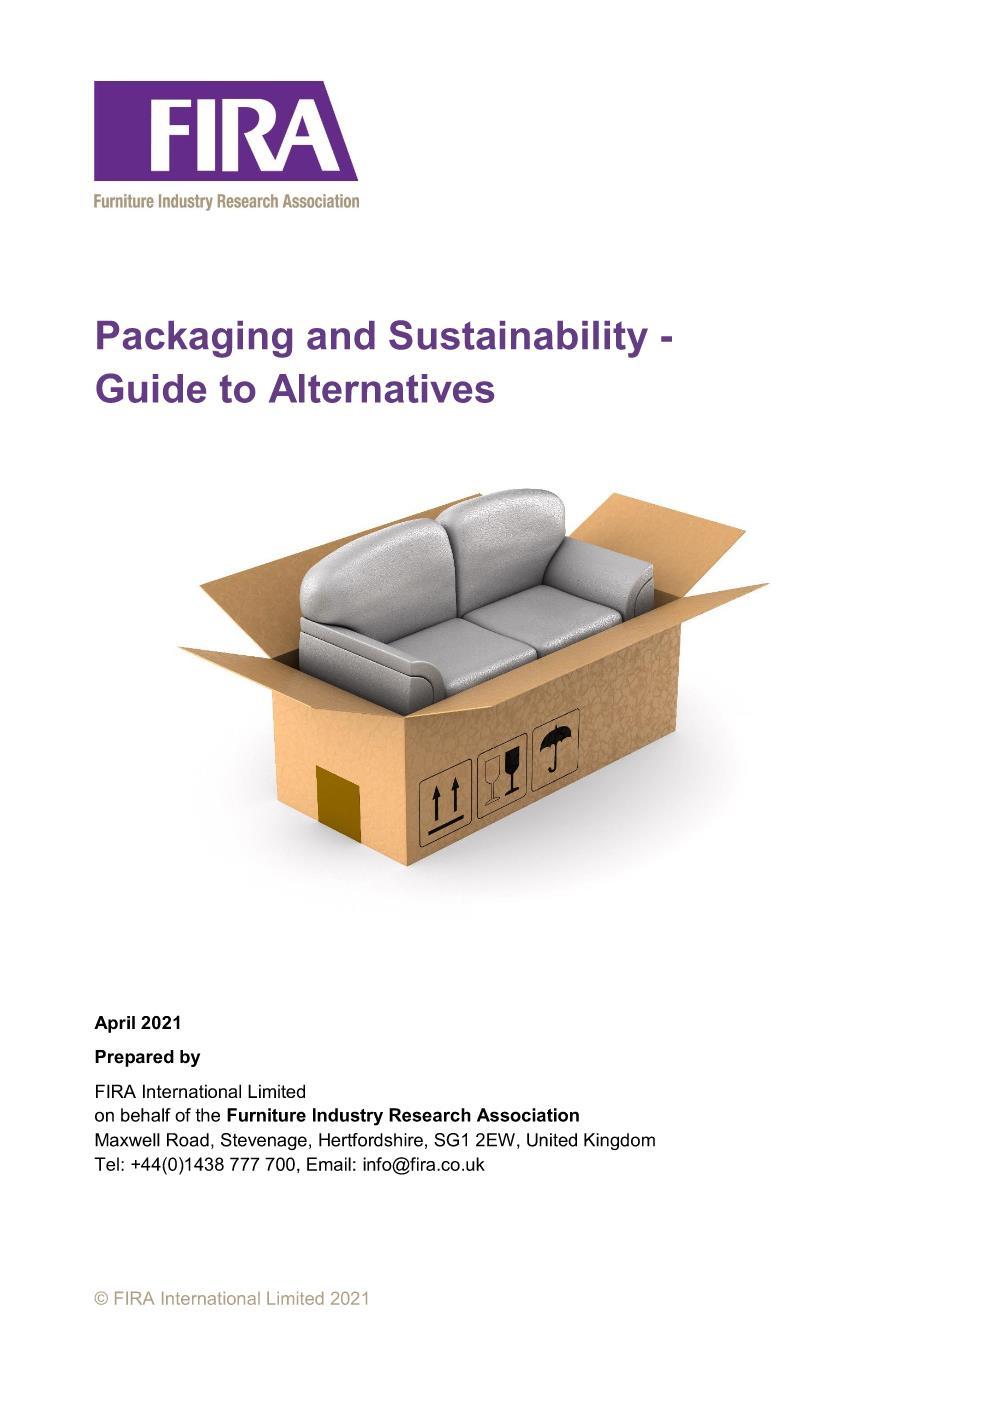 Packaging and Sustainability: Guide to Alternatives